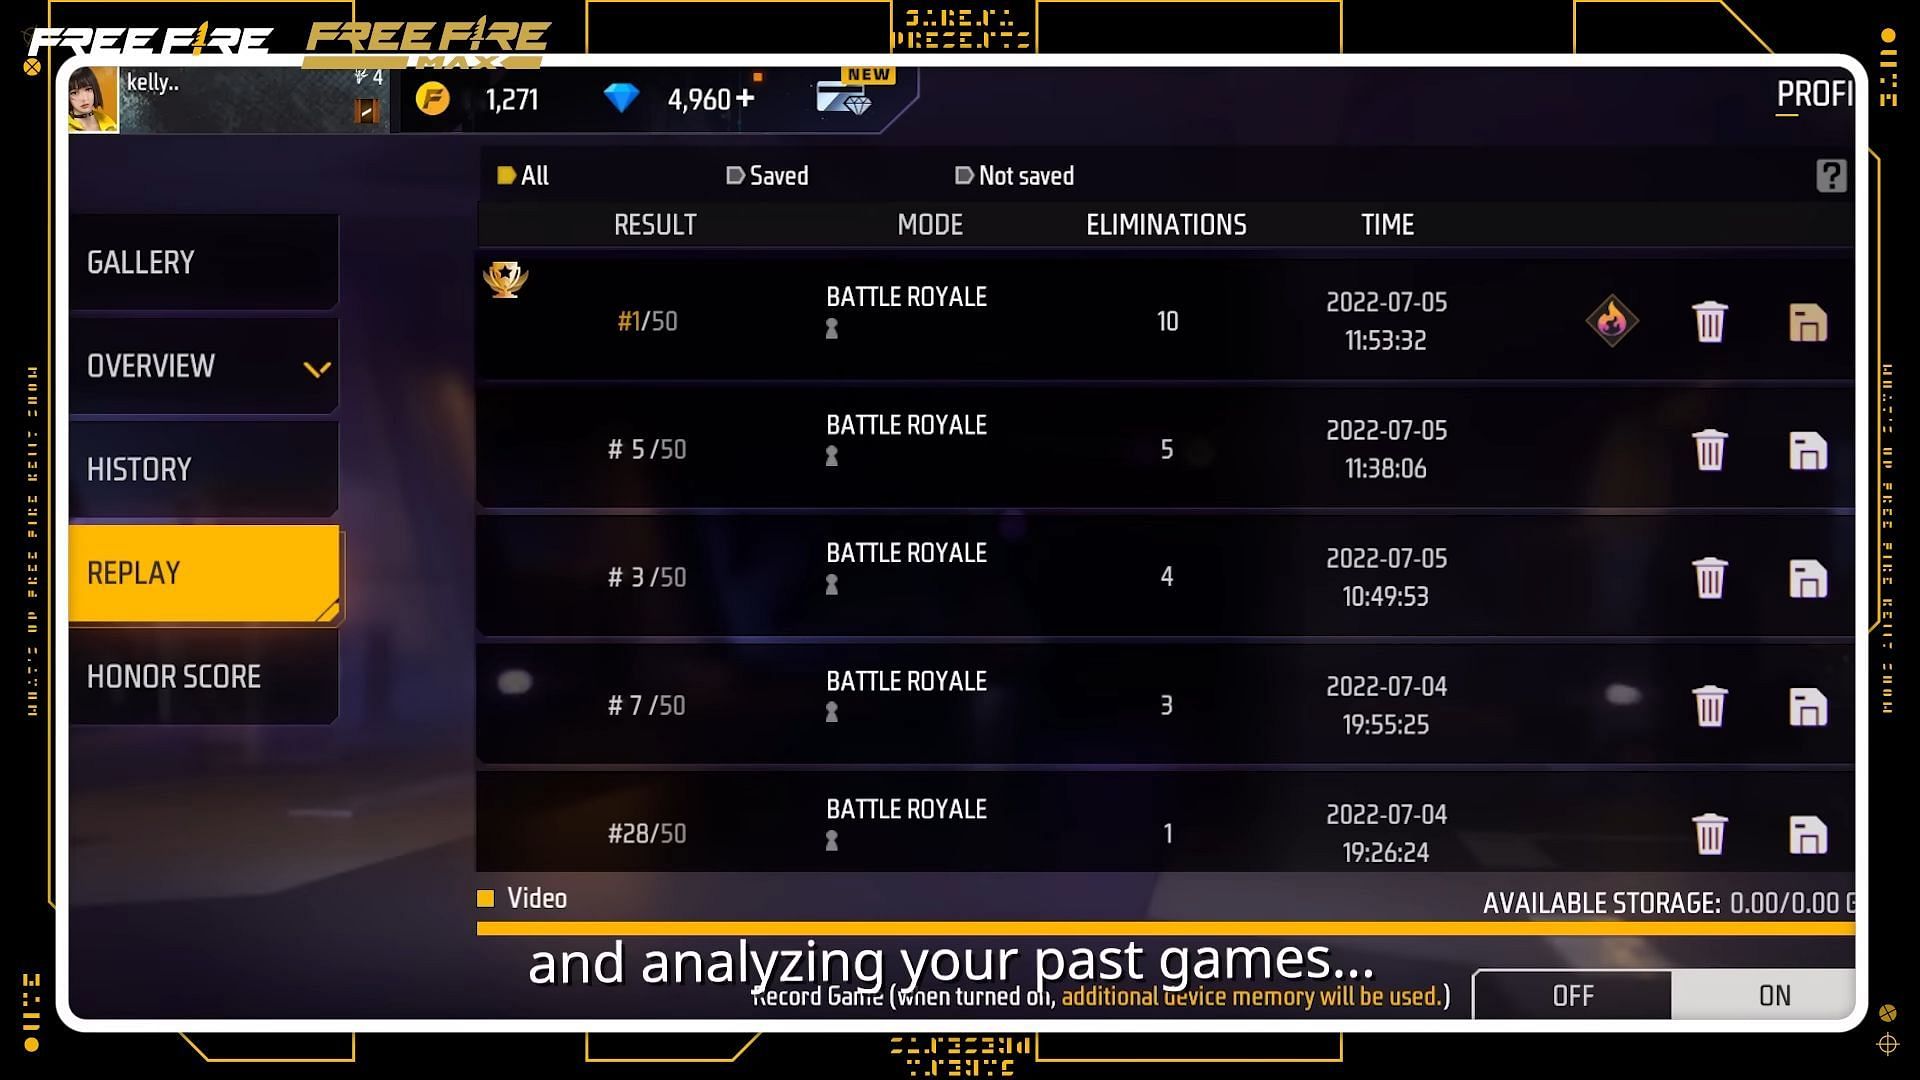 Replay Highlights will allow gamers to analyze their past games effectively (Image via Garena)